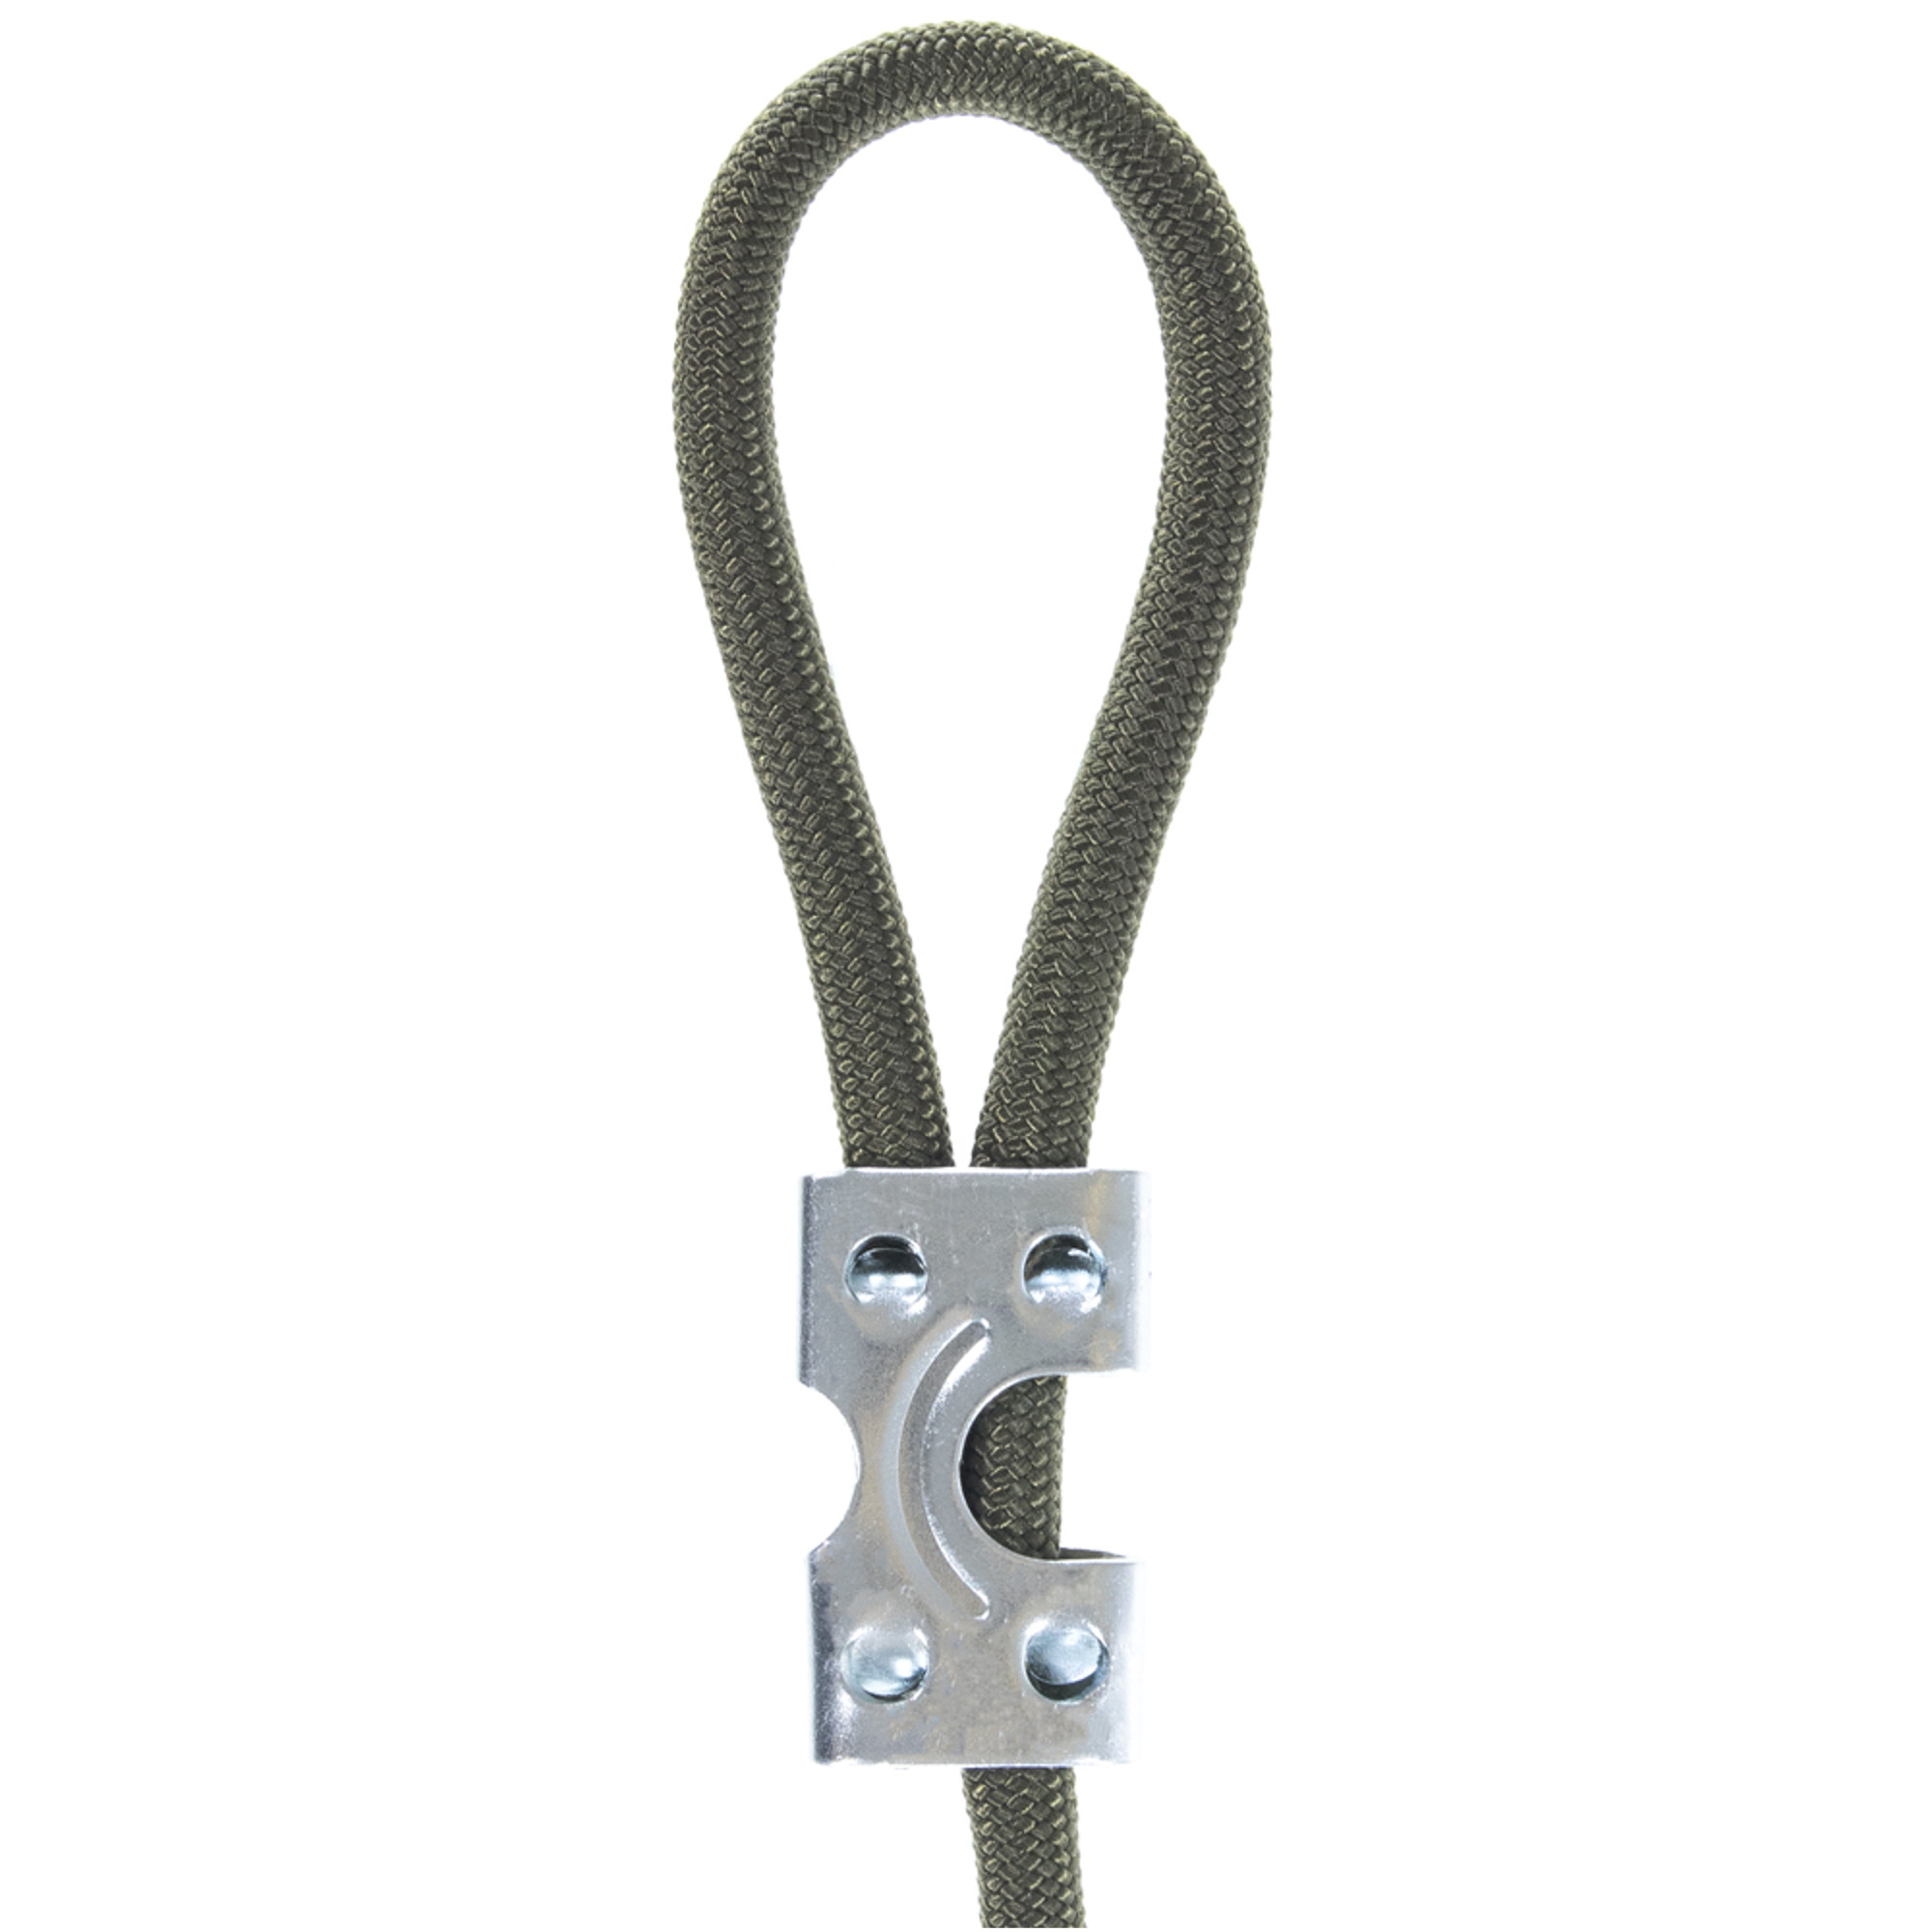 Heavy Duty Zinc Plated Double Rope Clamps for 3/8-inch, 1/2-inch, 5/8-inch and 1-inch Ropes Cords - Multiple Pack Sizes Available - image 5 of 5